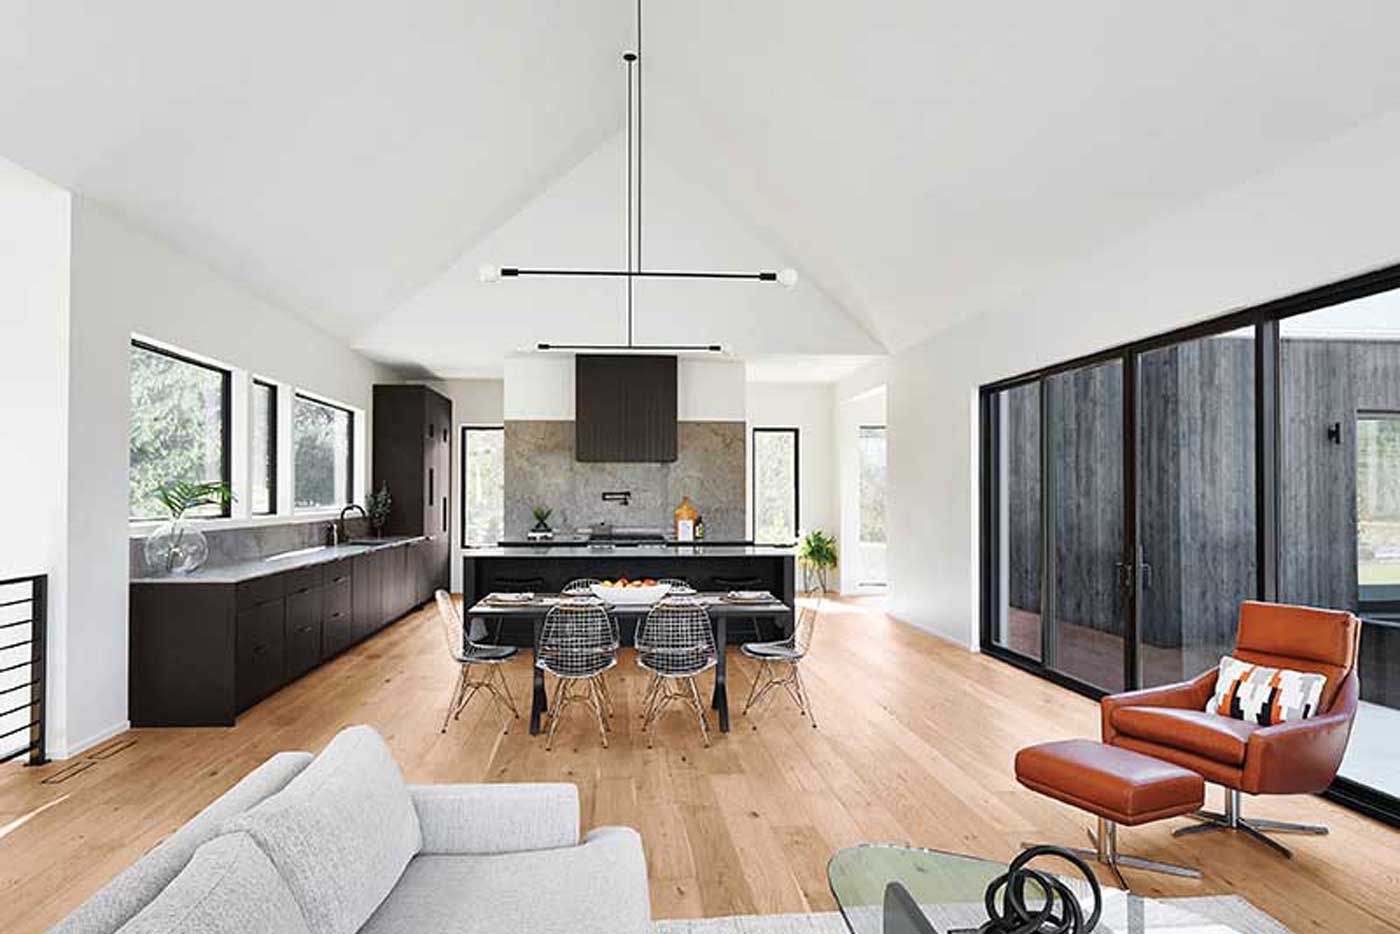 MARVIN® Modern Farmhouse Windows are available at Westside Door: Orange County, Southern California MARVIN® Authorized Dealer. Westside Door serves West Los Angeles and the Southern California area. Also serving Orange County, South Bay, Beverly Hills, Malibu, West Los Angeles and all of Southern California. Call us: (310) 478-0311